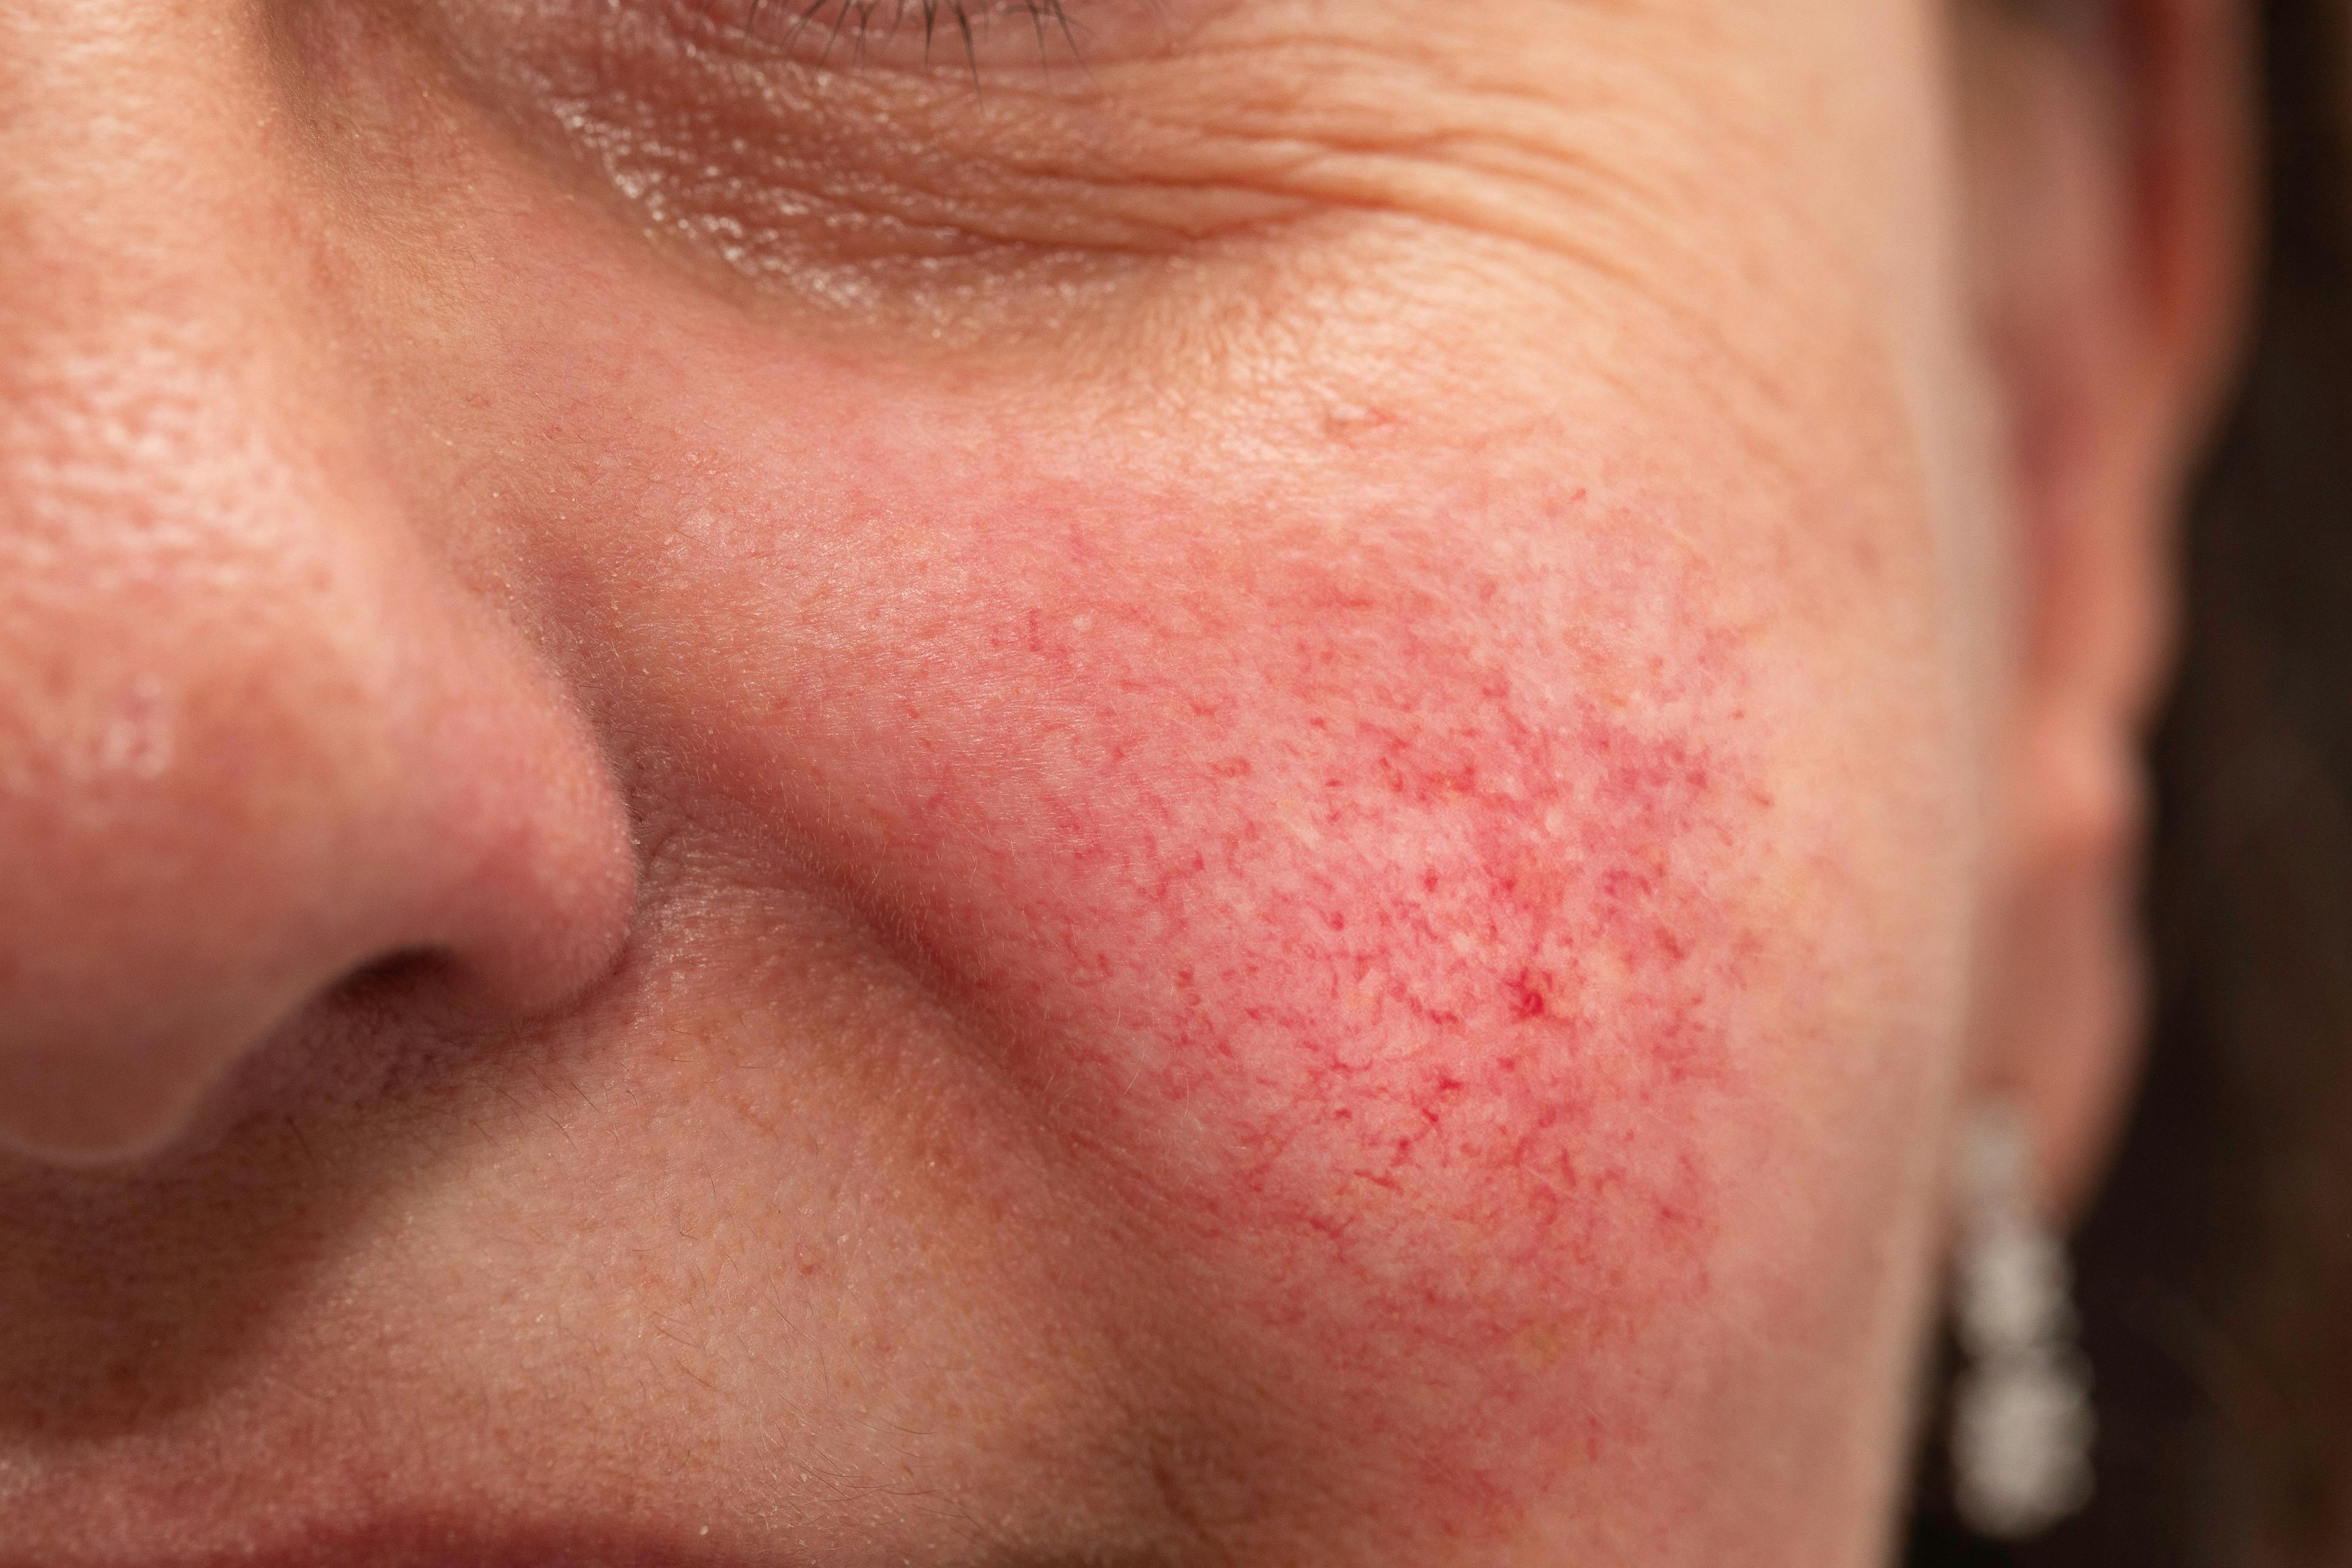 In Rosacea, Botulinum Toxin Requires Further Analysis of Long-Term Clinical Efficacy and Safety